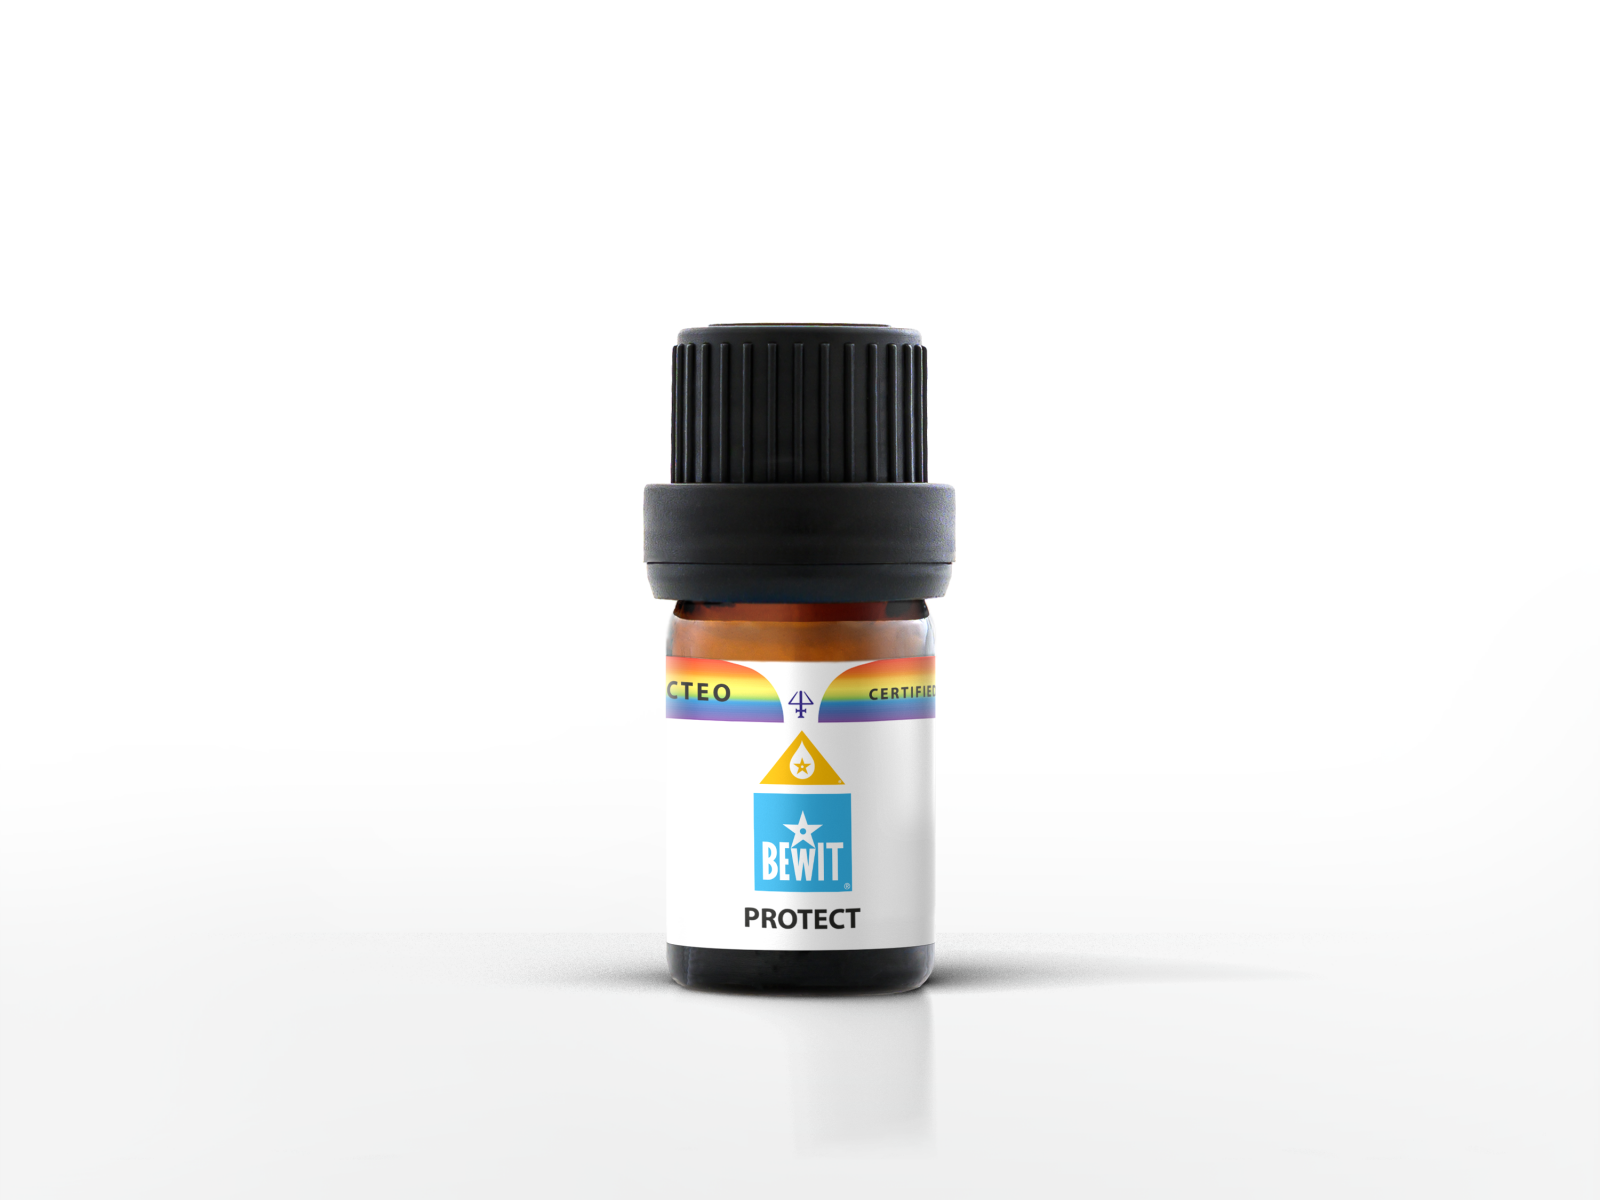 BEWIT PROTECT - A unique blend of the essential oils - 2